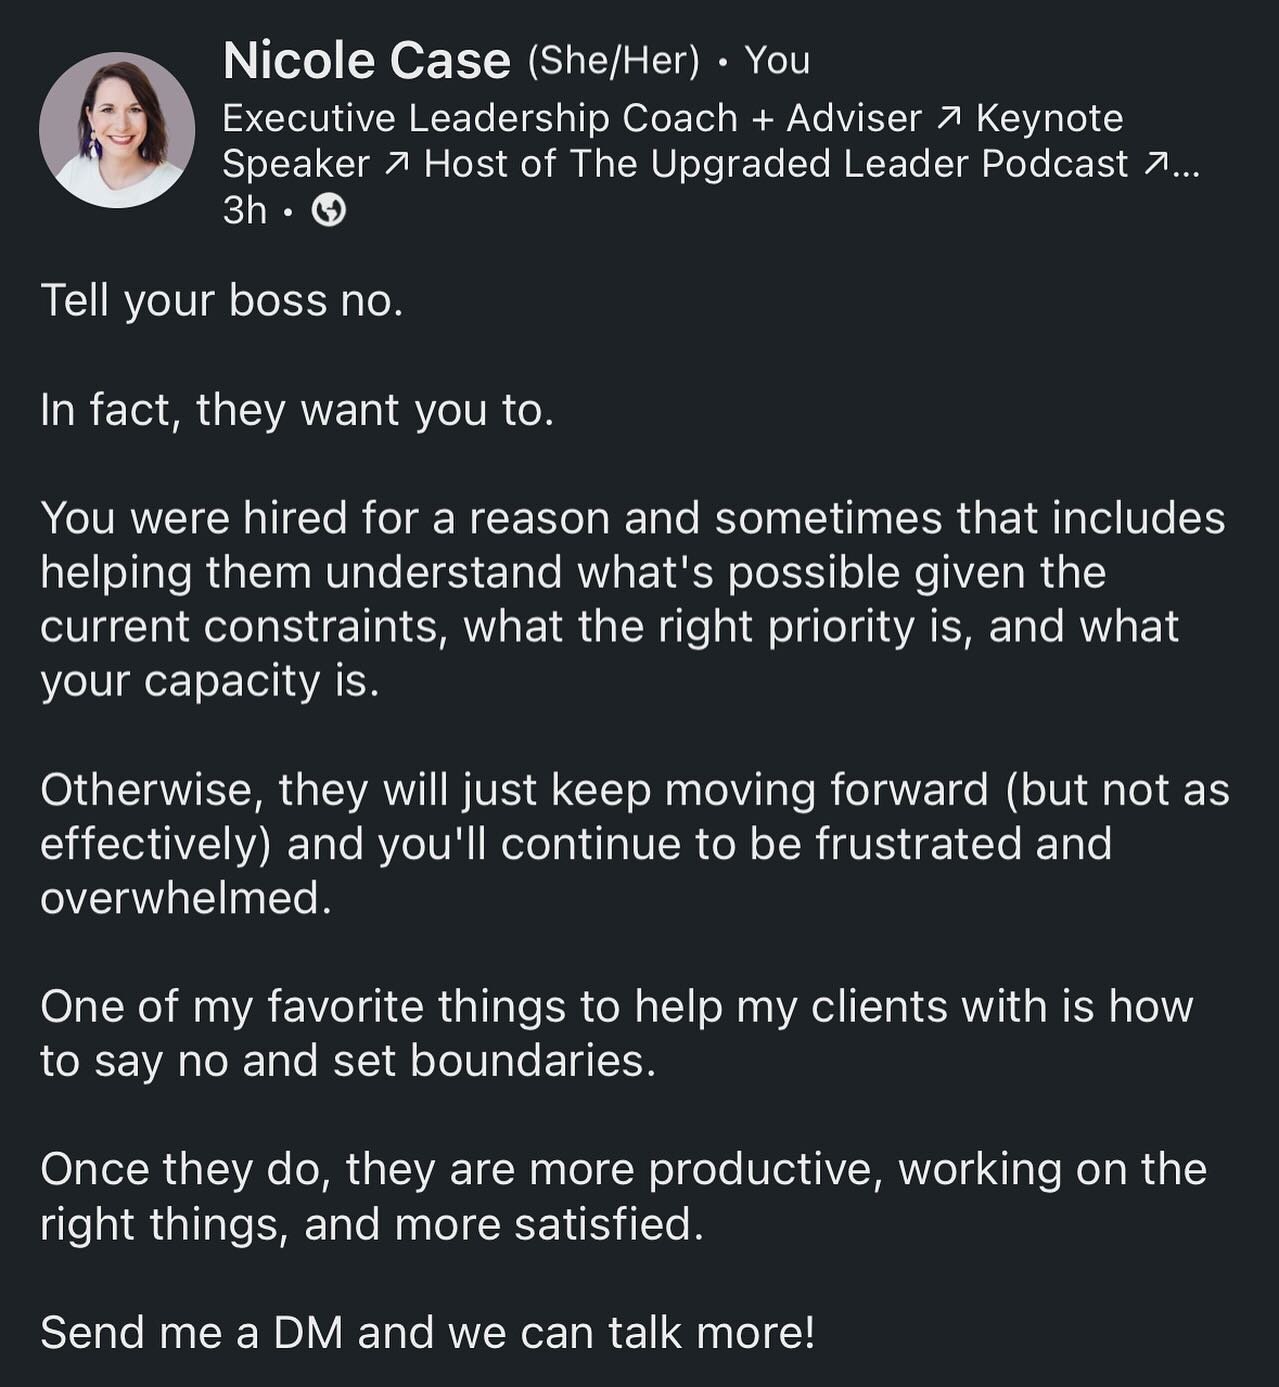 What do you think? Do you tell your boss no when you should? Do you listen to your team when they tell you no?